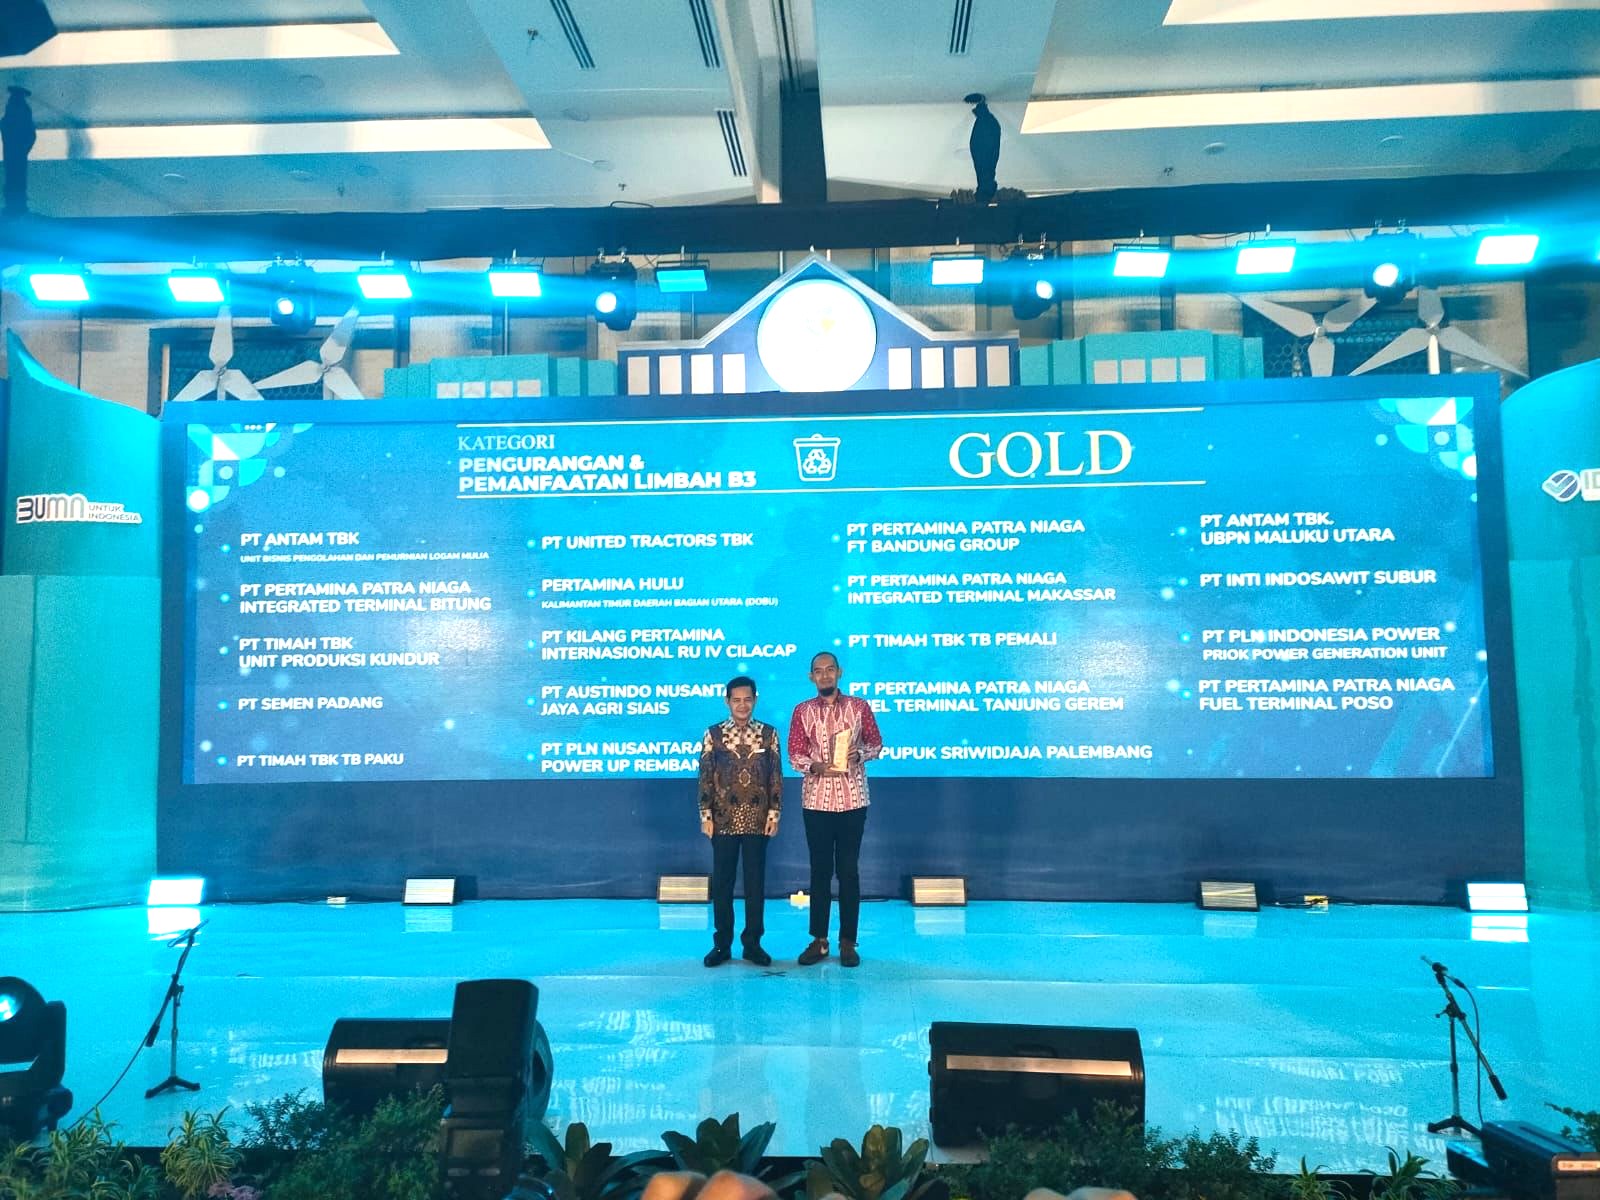 Presentation of awards was given by Sucofindo to Dicky Firmansyah (Branch Manager UT Semarang).